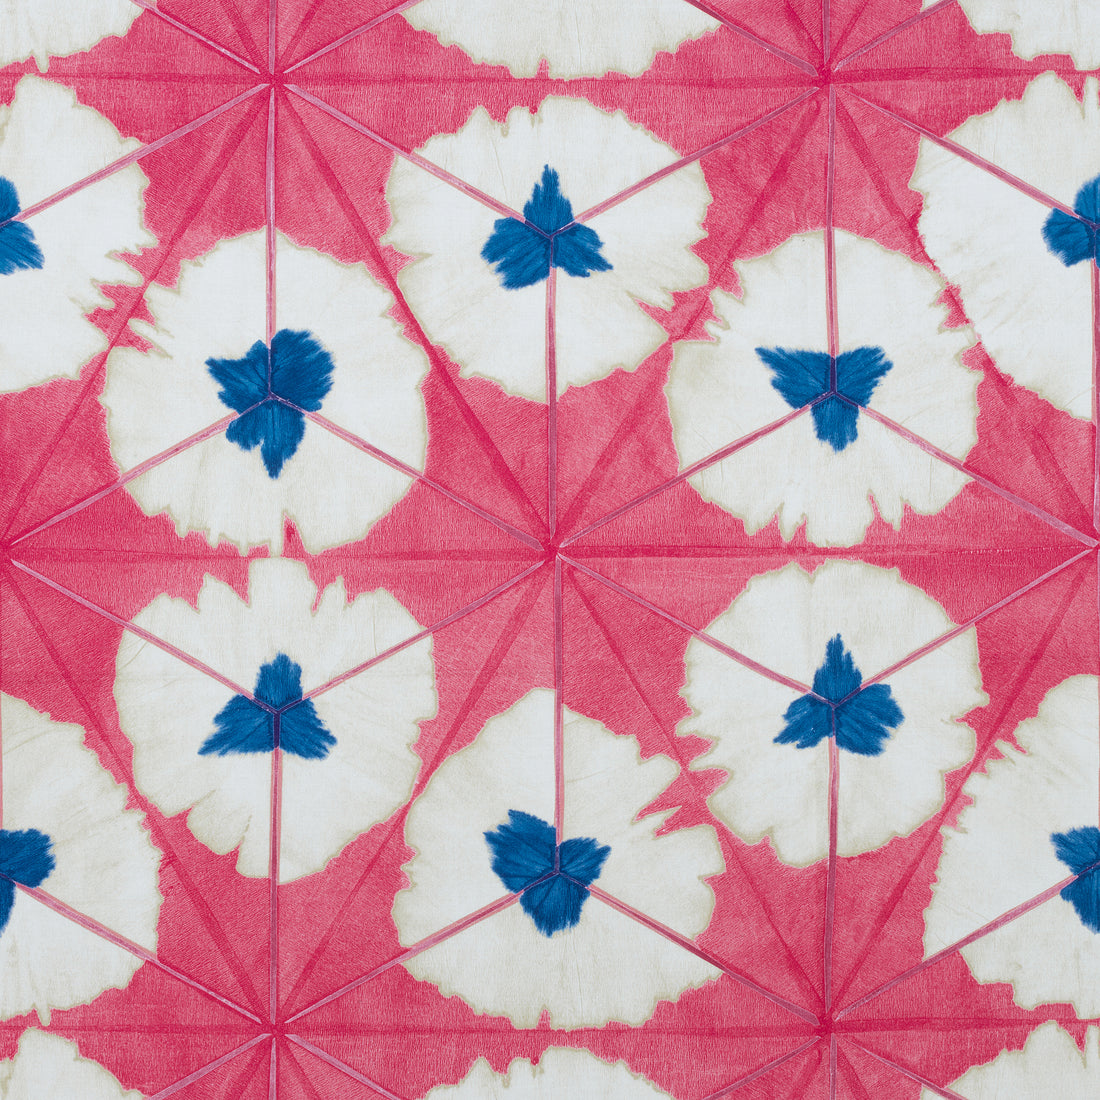 Sunburst fabric in pink and blue color - pattern number F913087 - by Thibaut in the Summer House collection